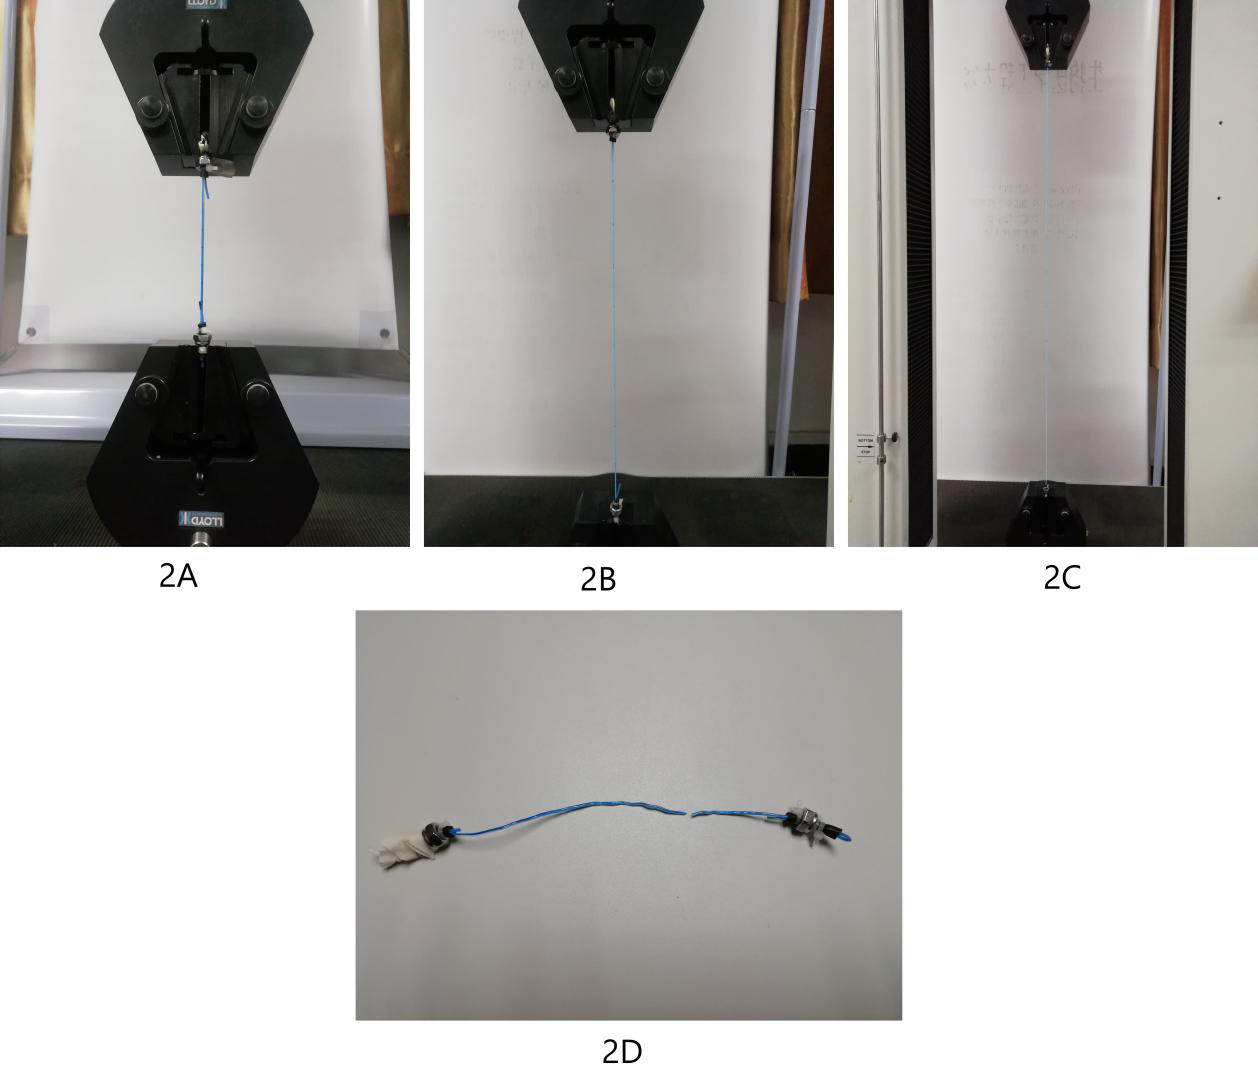 Mechanical test process. 2A: Conduit ready for stretching; 2B: Conduit stretching in progress; 2C: Conduit tension near limit state; 2D: Status after conduit fracture.